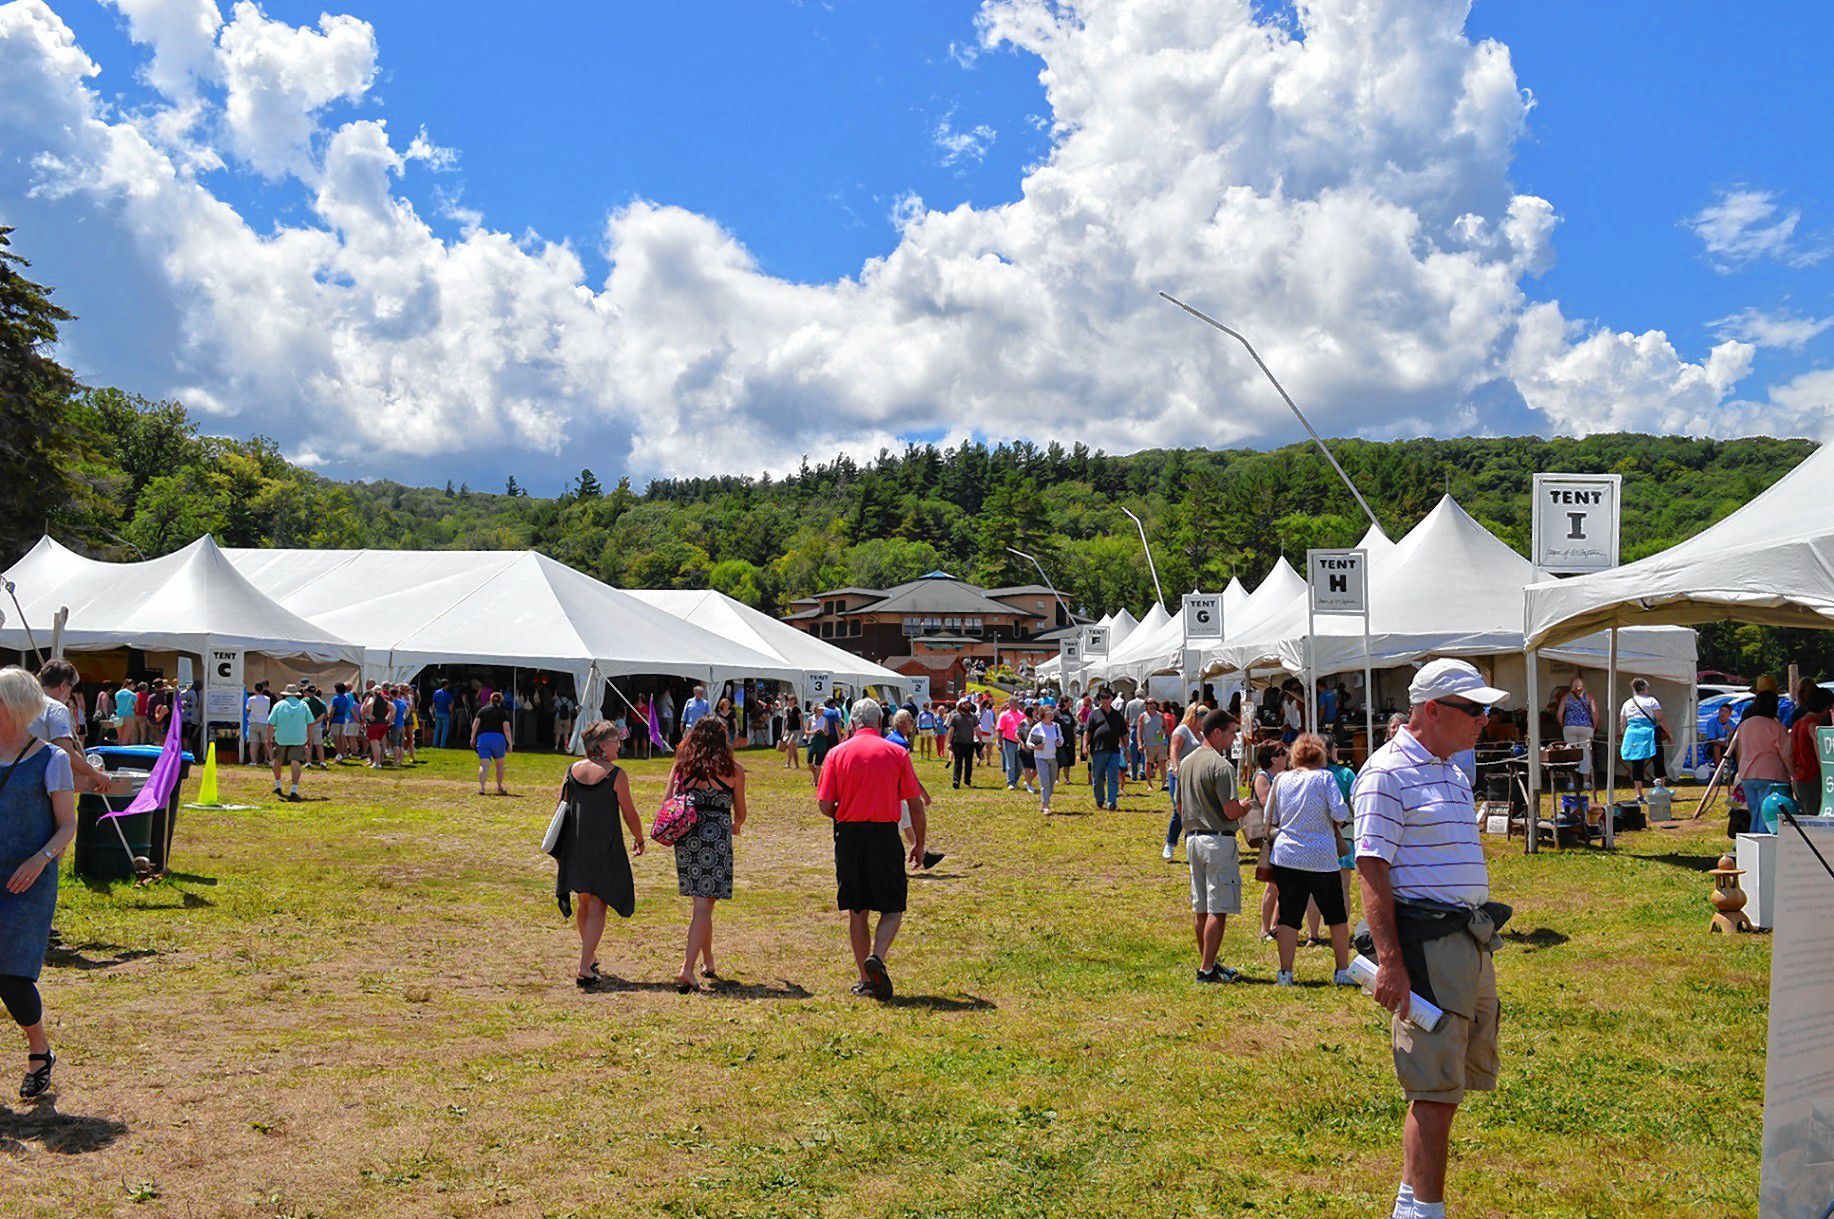 : fair gameThe 83rd annual League of NH Craftsmen’s  Craftsmen’s Fair is scheduled for Aug. 6-14 at  Mount Sunapee Resort.